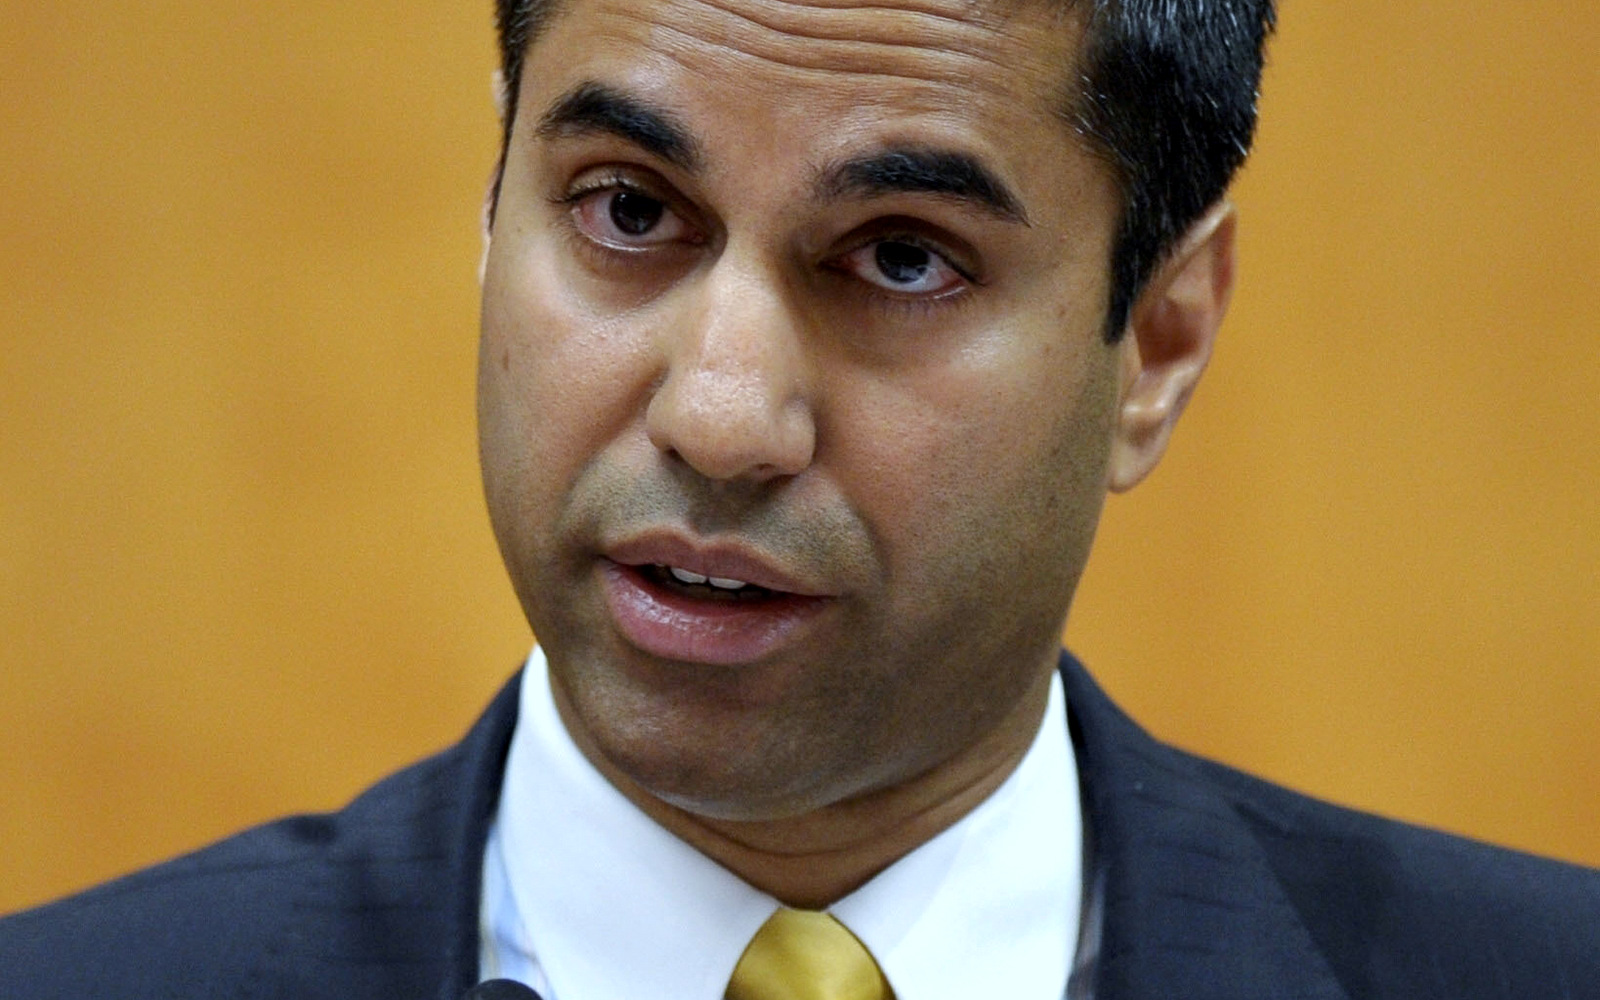 FCC commissioner Ajit Pai presents his dissent during a Federal Communications Commission (FCC) hearing at the FCC in Washington. (AP/Susan Walsh)